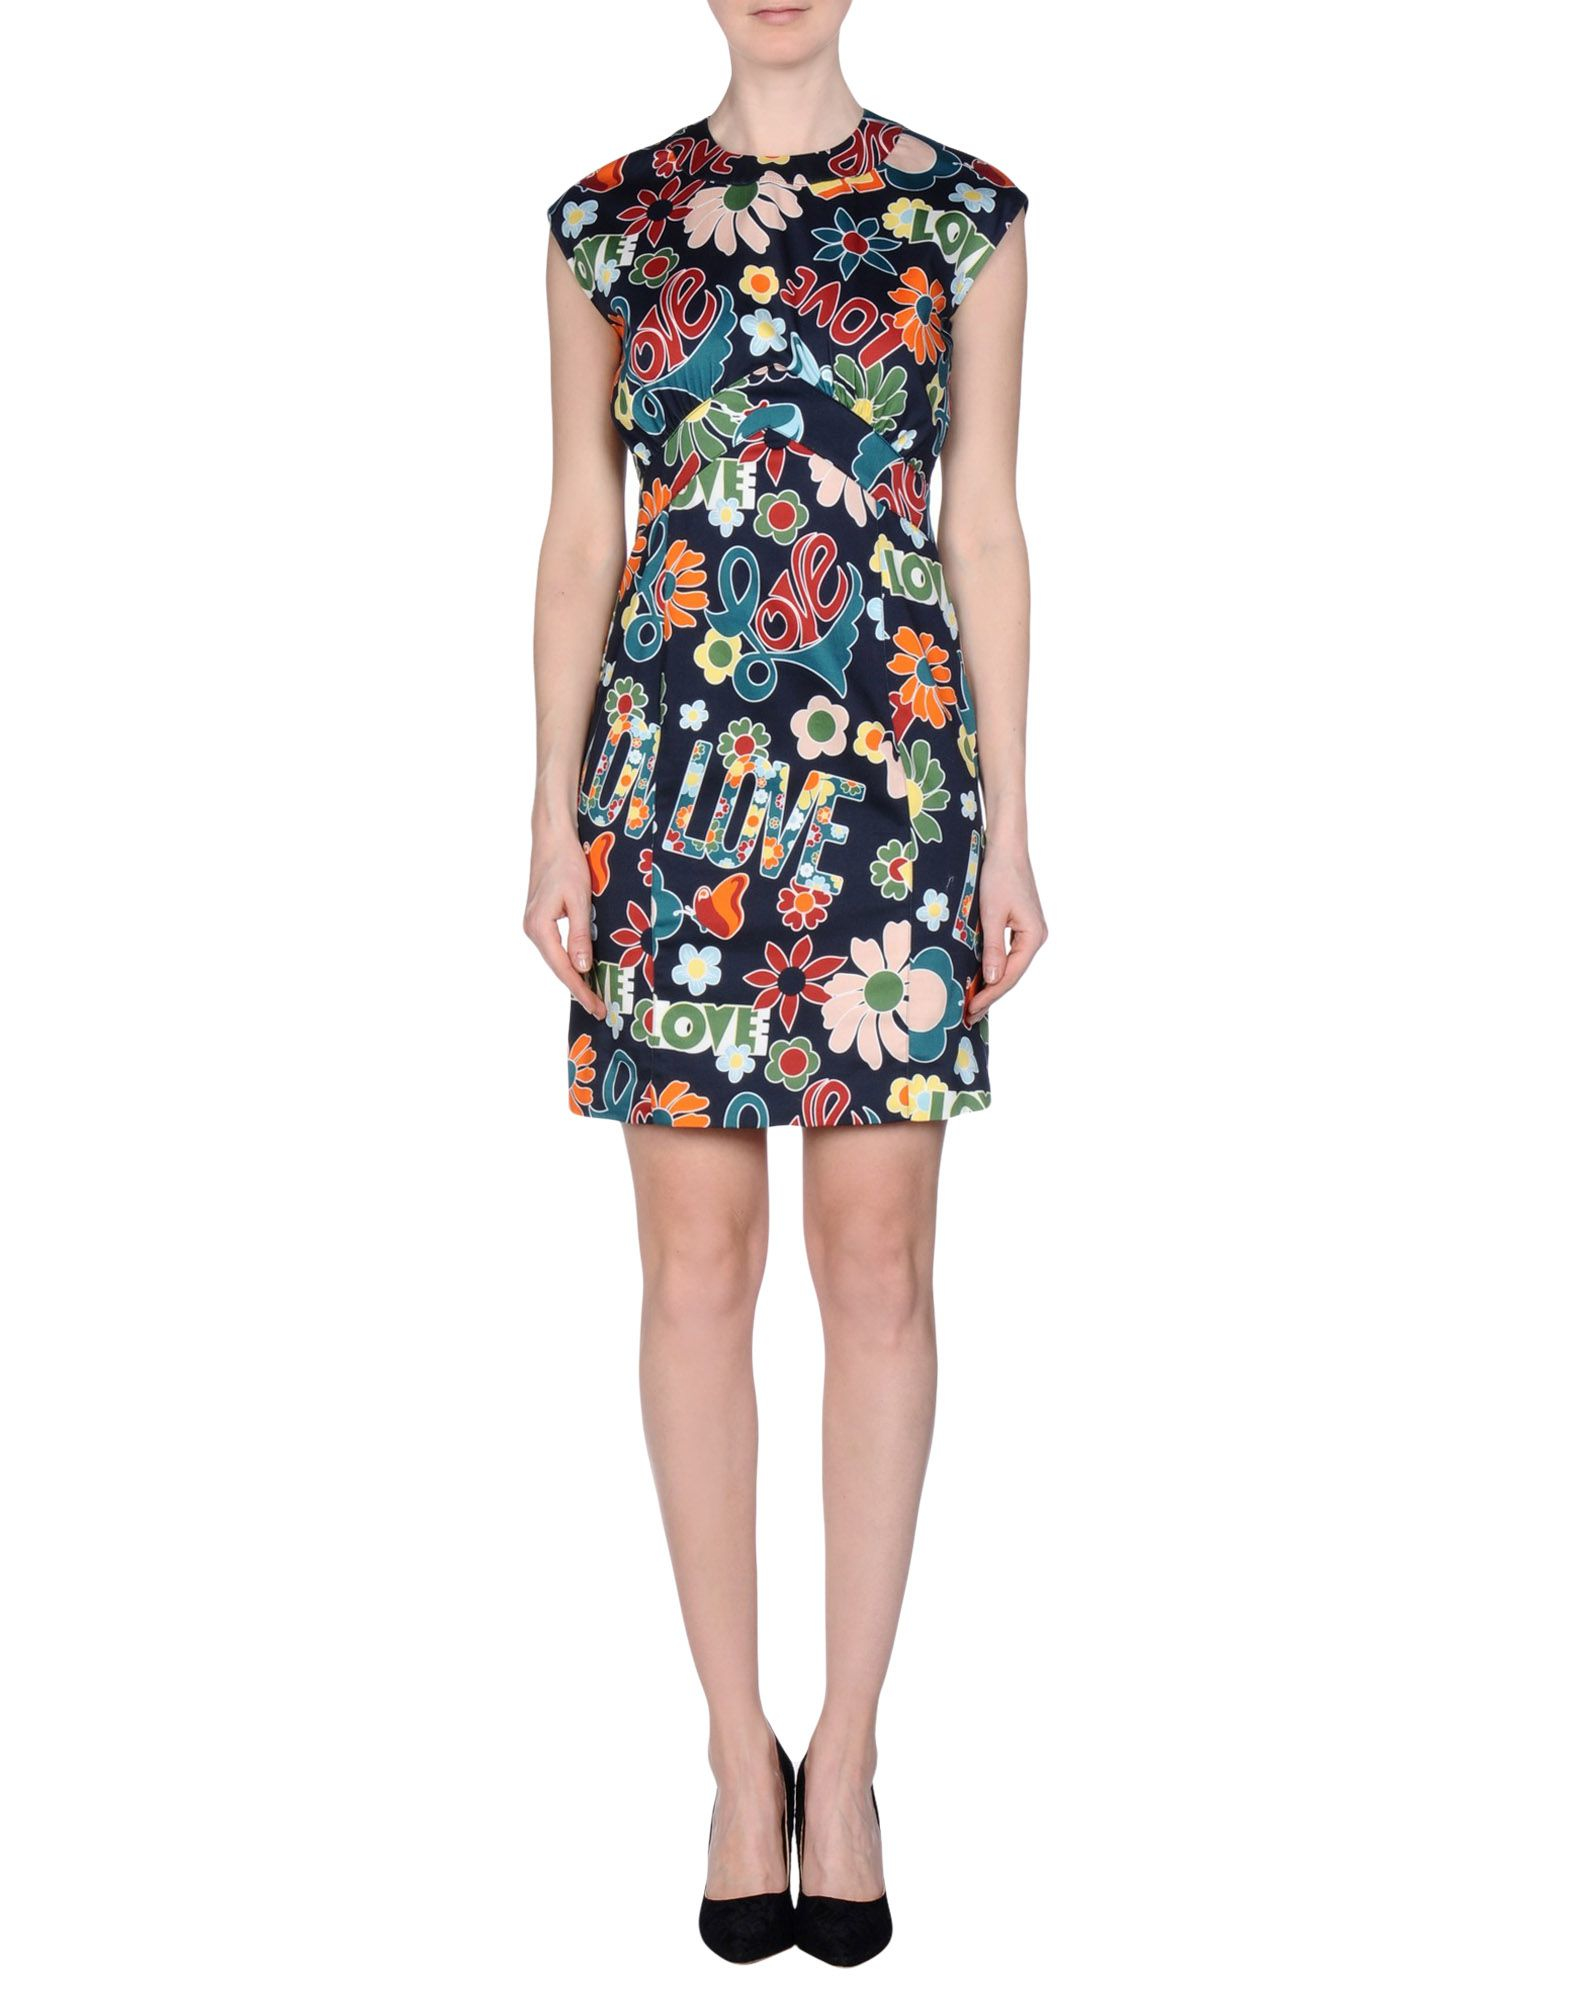 Lyst - Love Moschino Smock Dress with Bow Neck in Floral Print in Blue